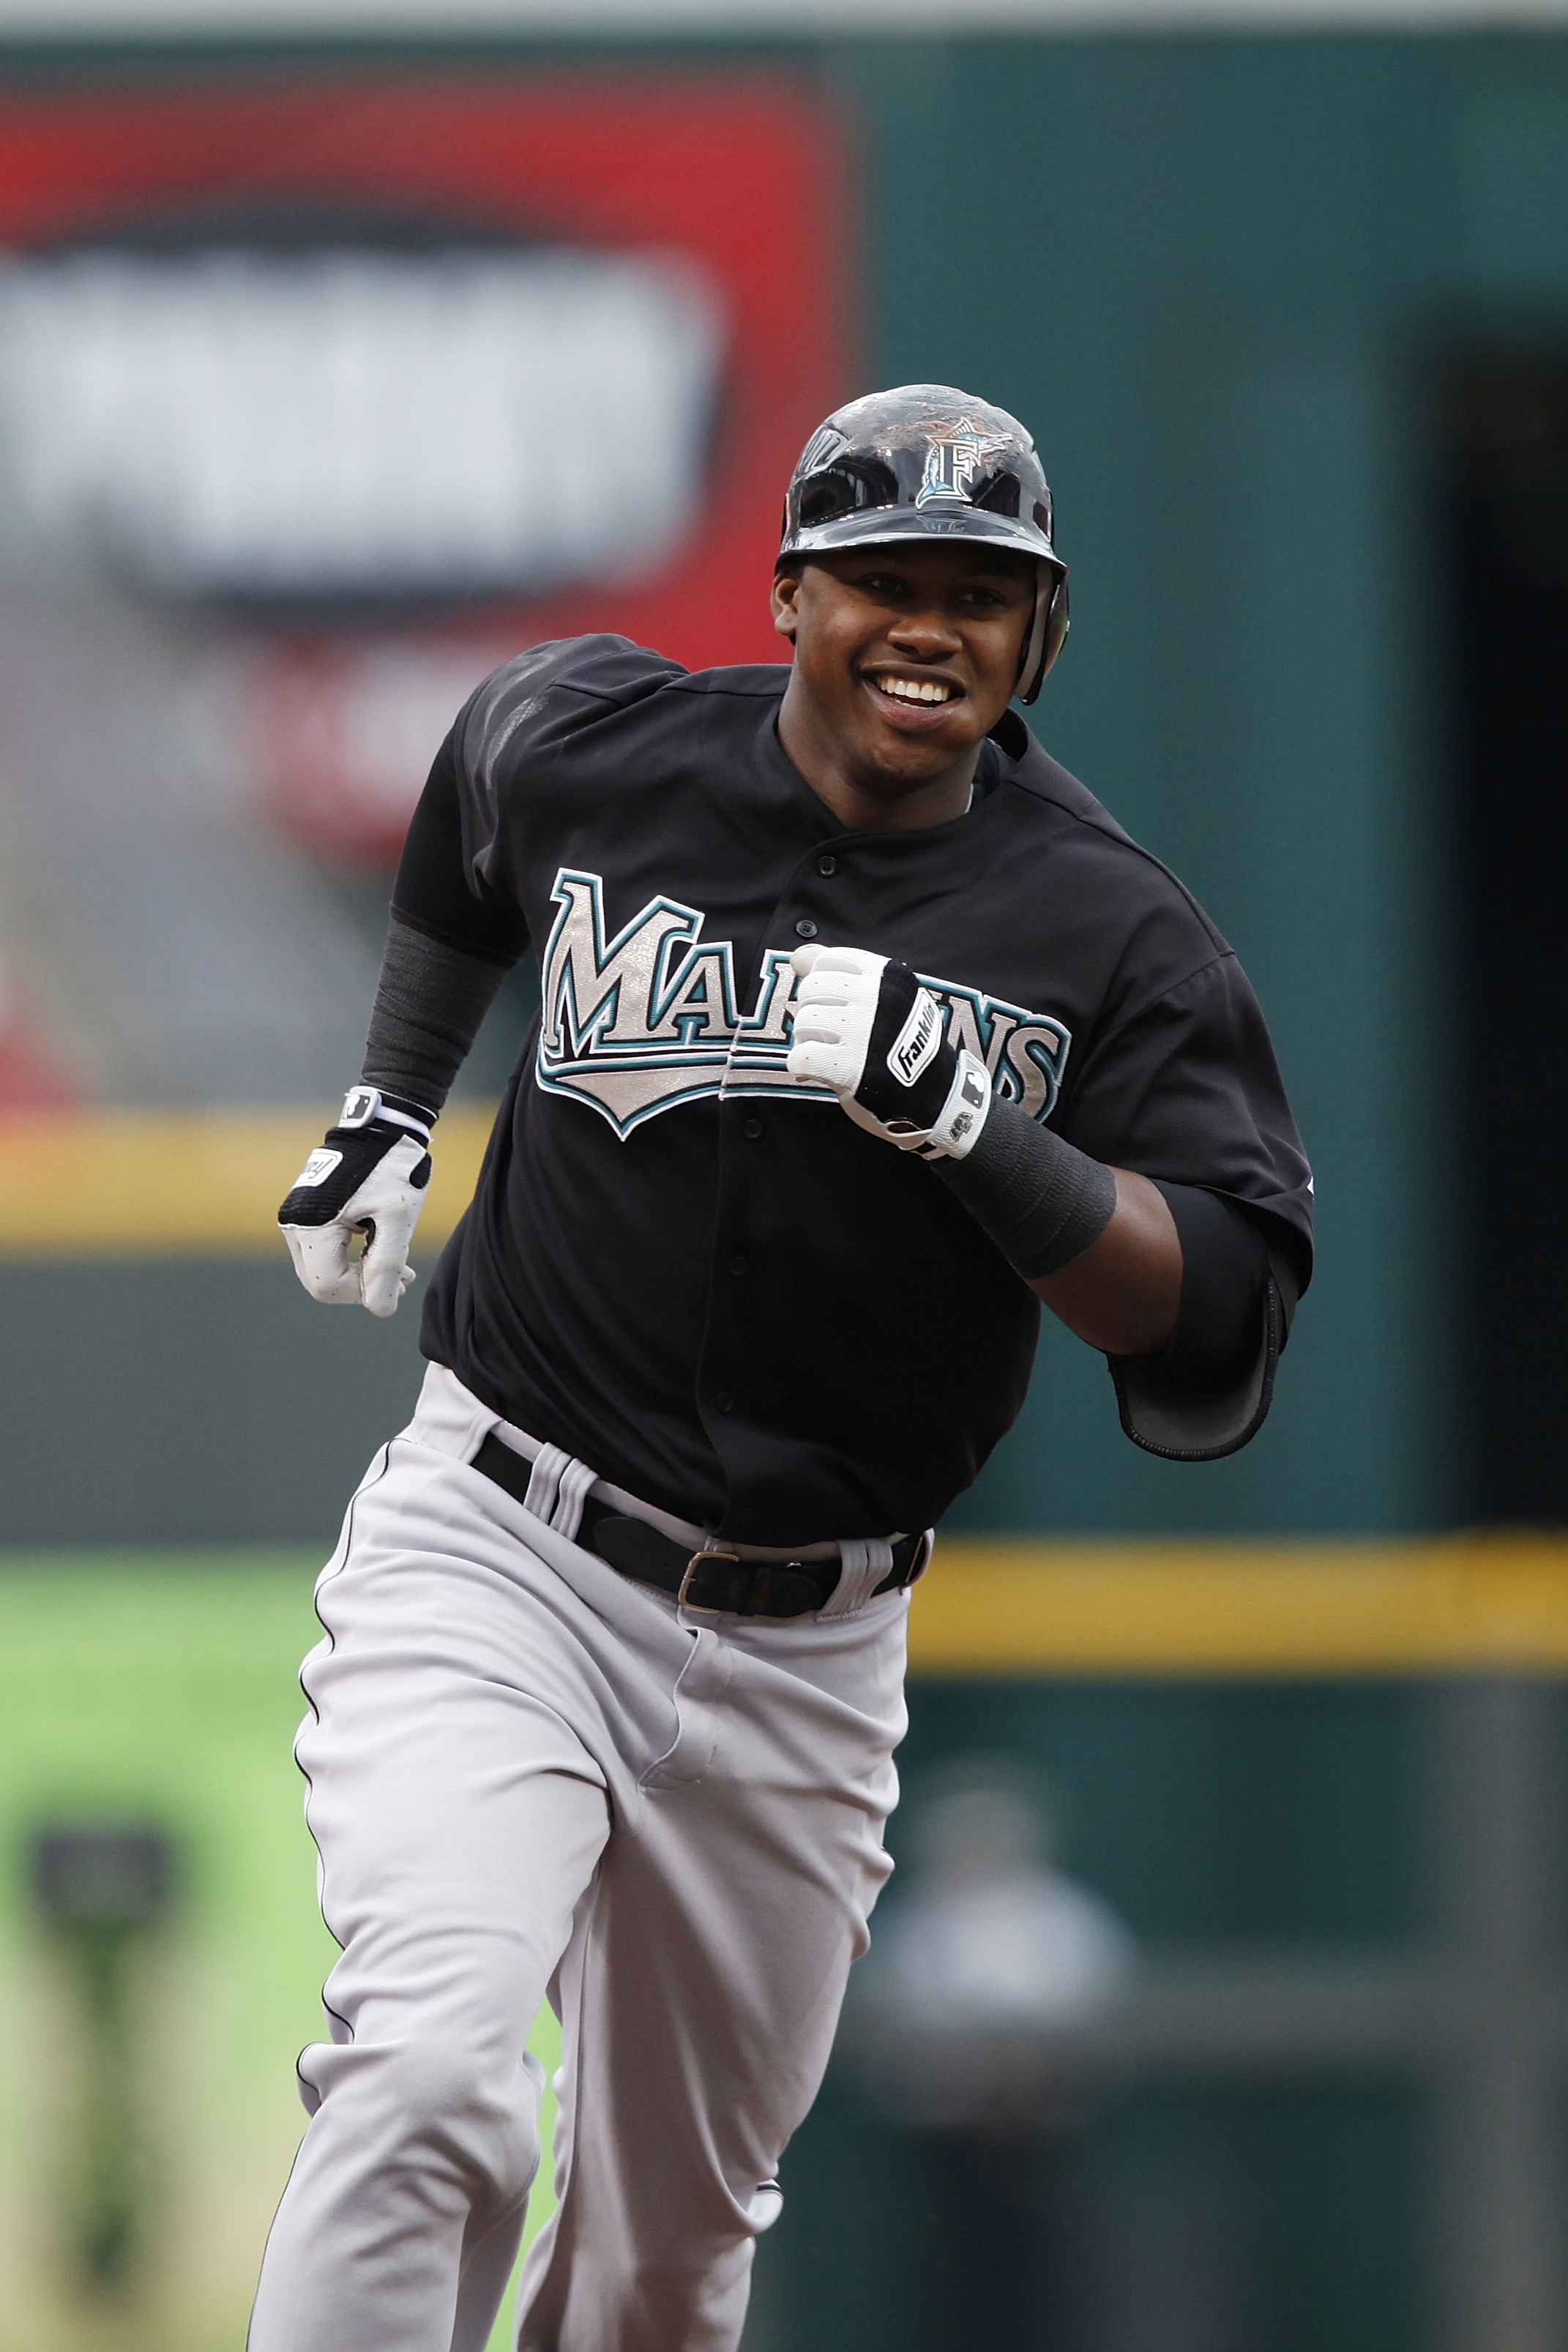 2010 MLB Preview: With Hanley Ramirez and Josh Johnson signed, the Marlins  have building blocks in place